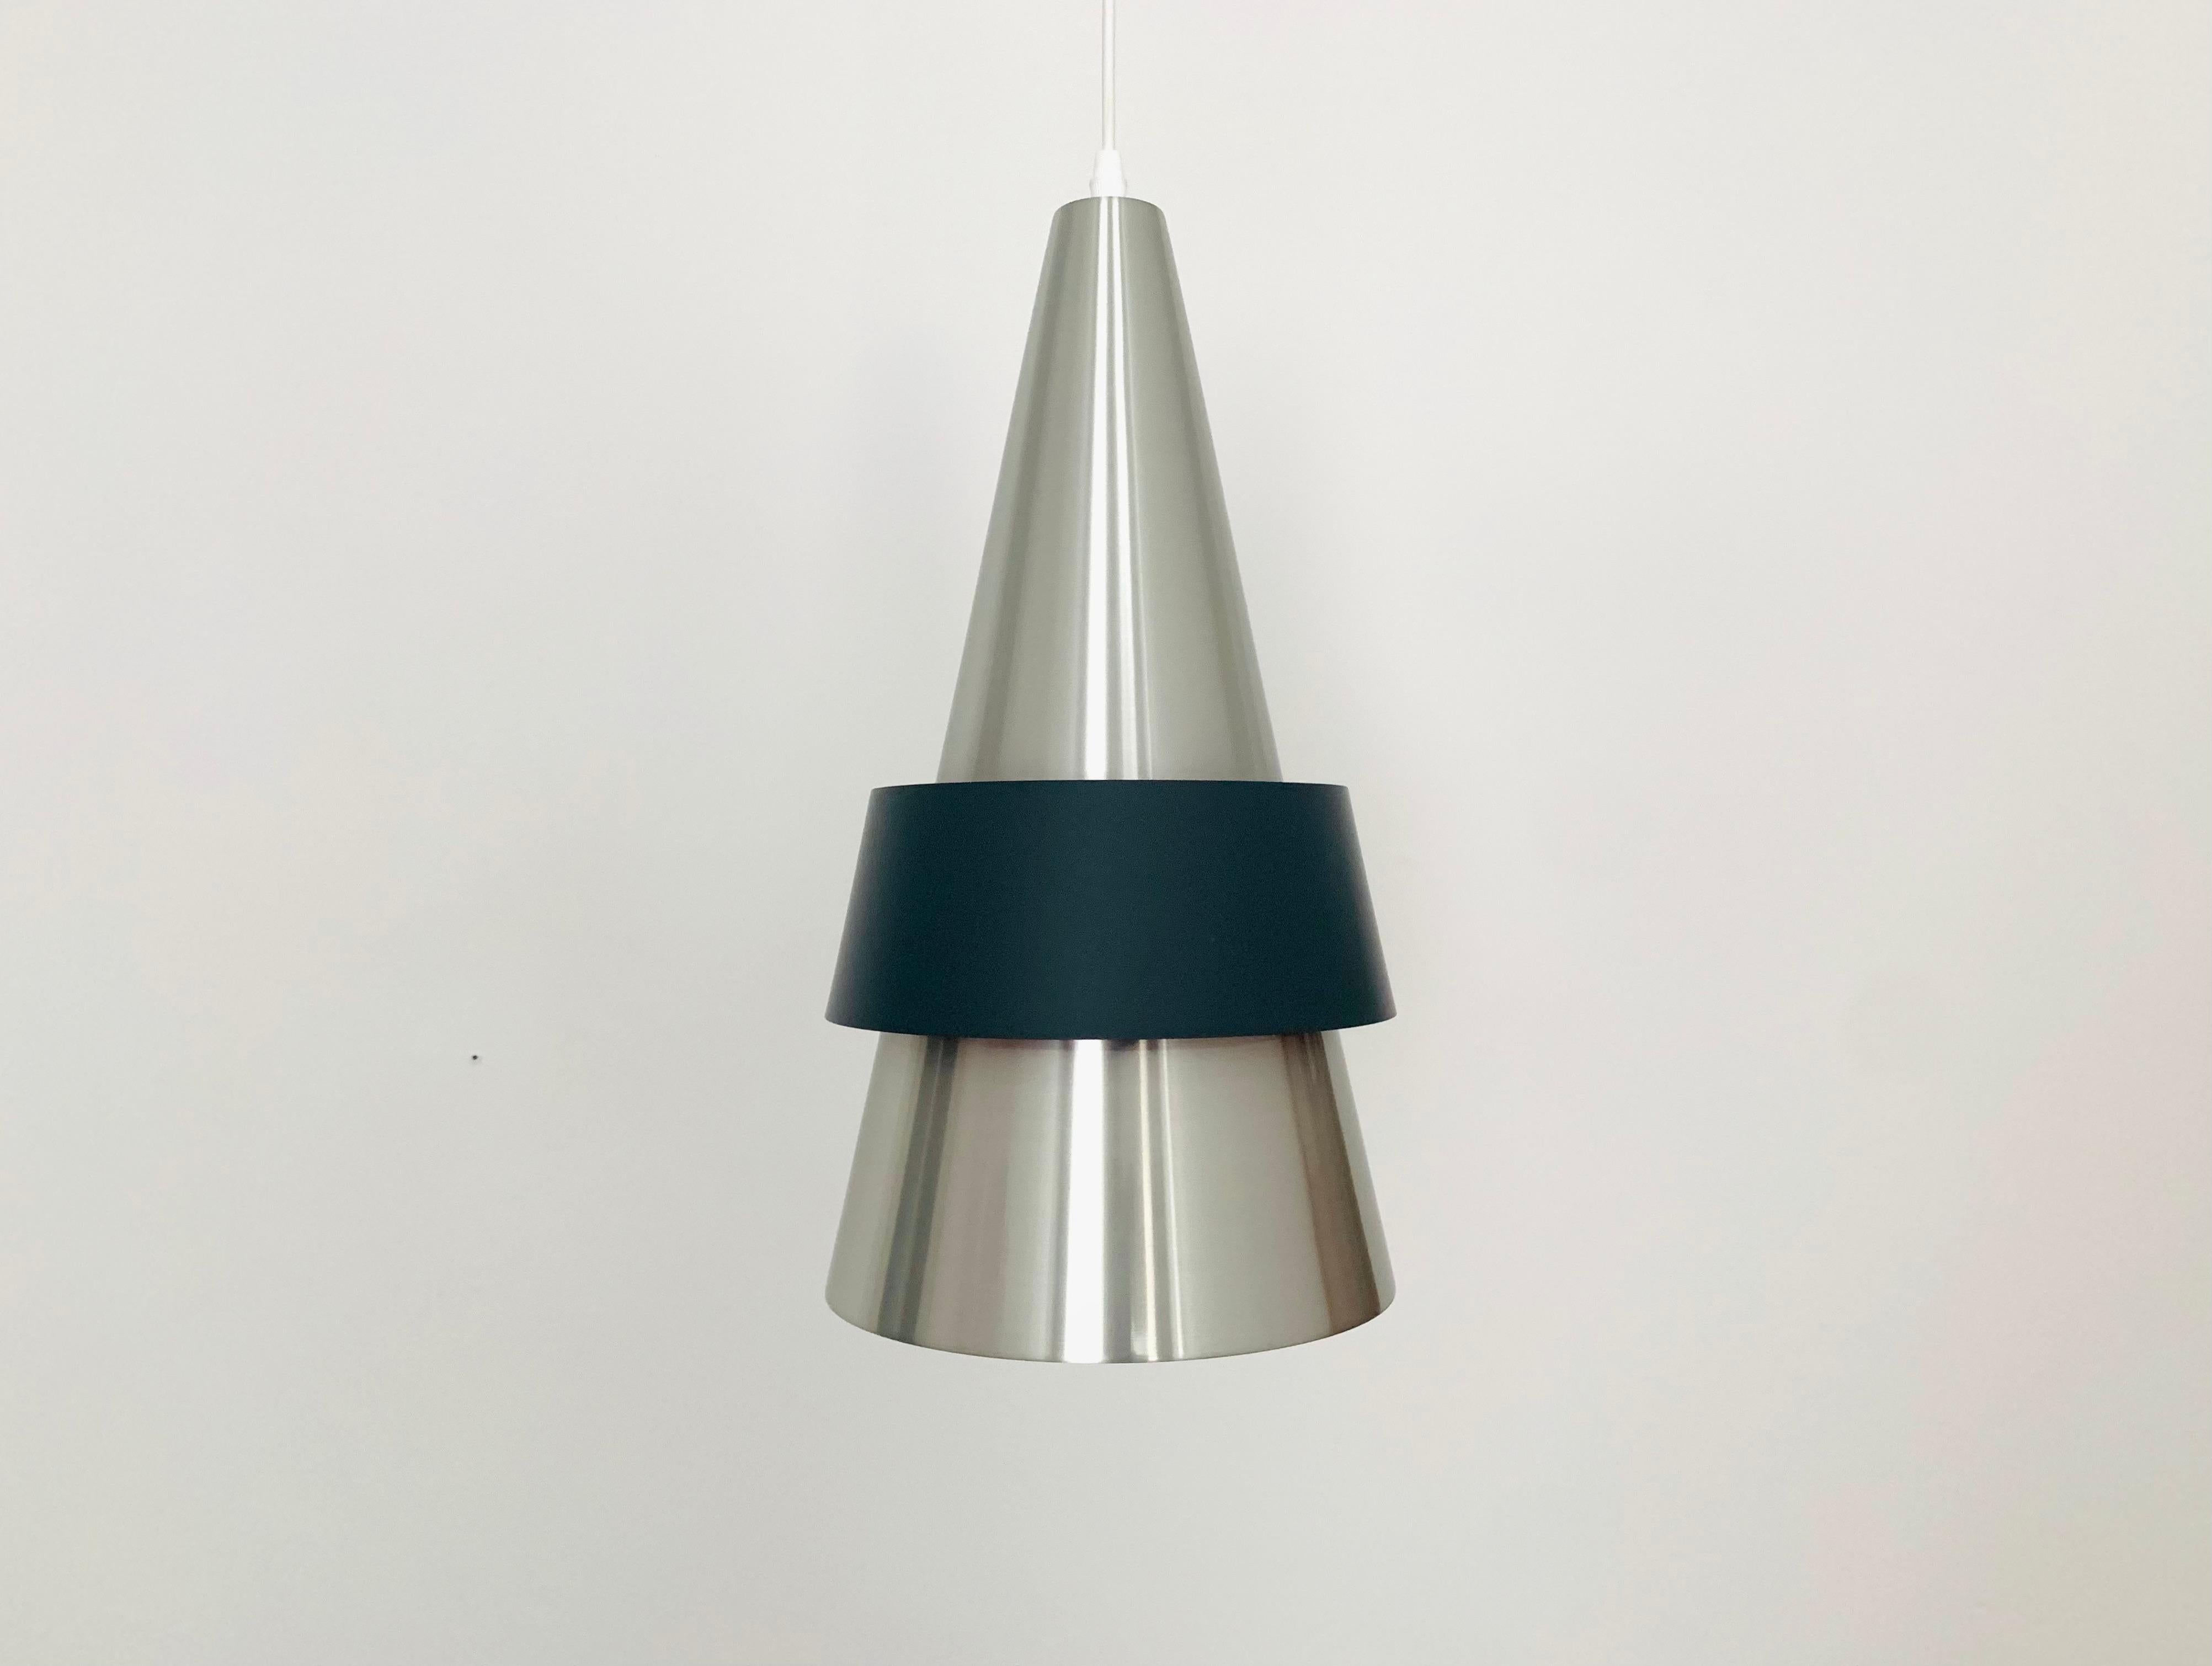 Very nice Corona pendant lamp by Fog and Morup from the 1960s.
The arrangement of the slats and the color design create a very cozy lighting atmosphere.
Impressively beautiful and contemporary design.

Design: Jo Hammerborg
Manufacturer: Fog and